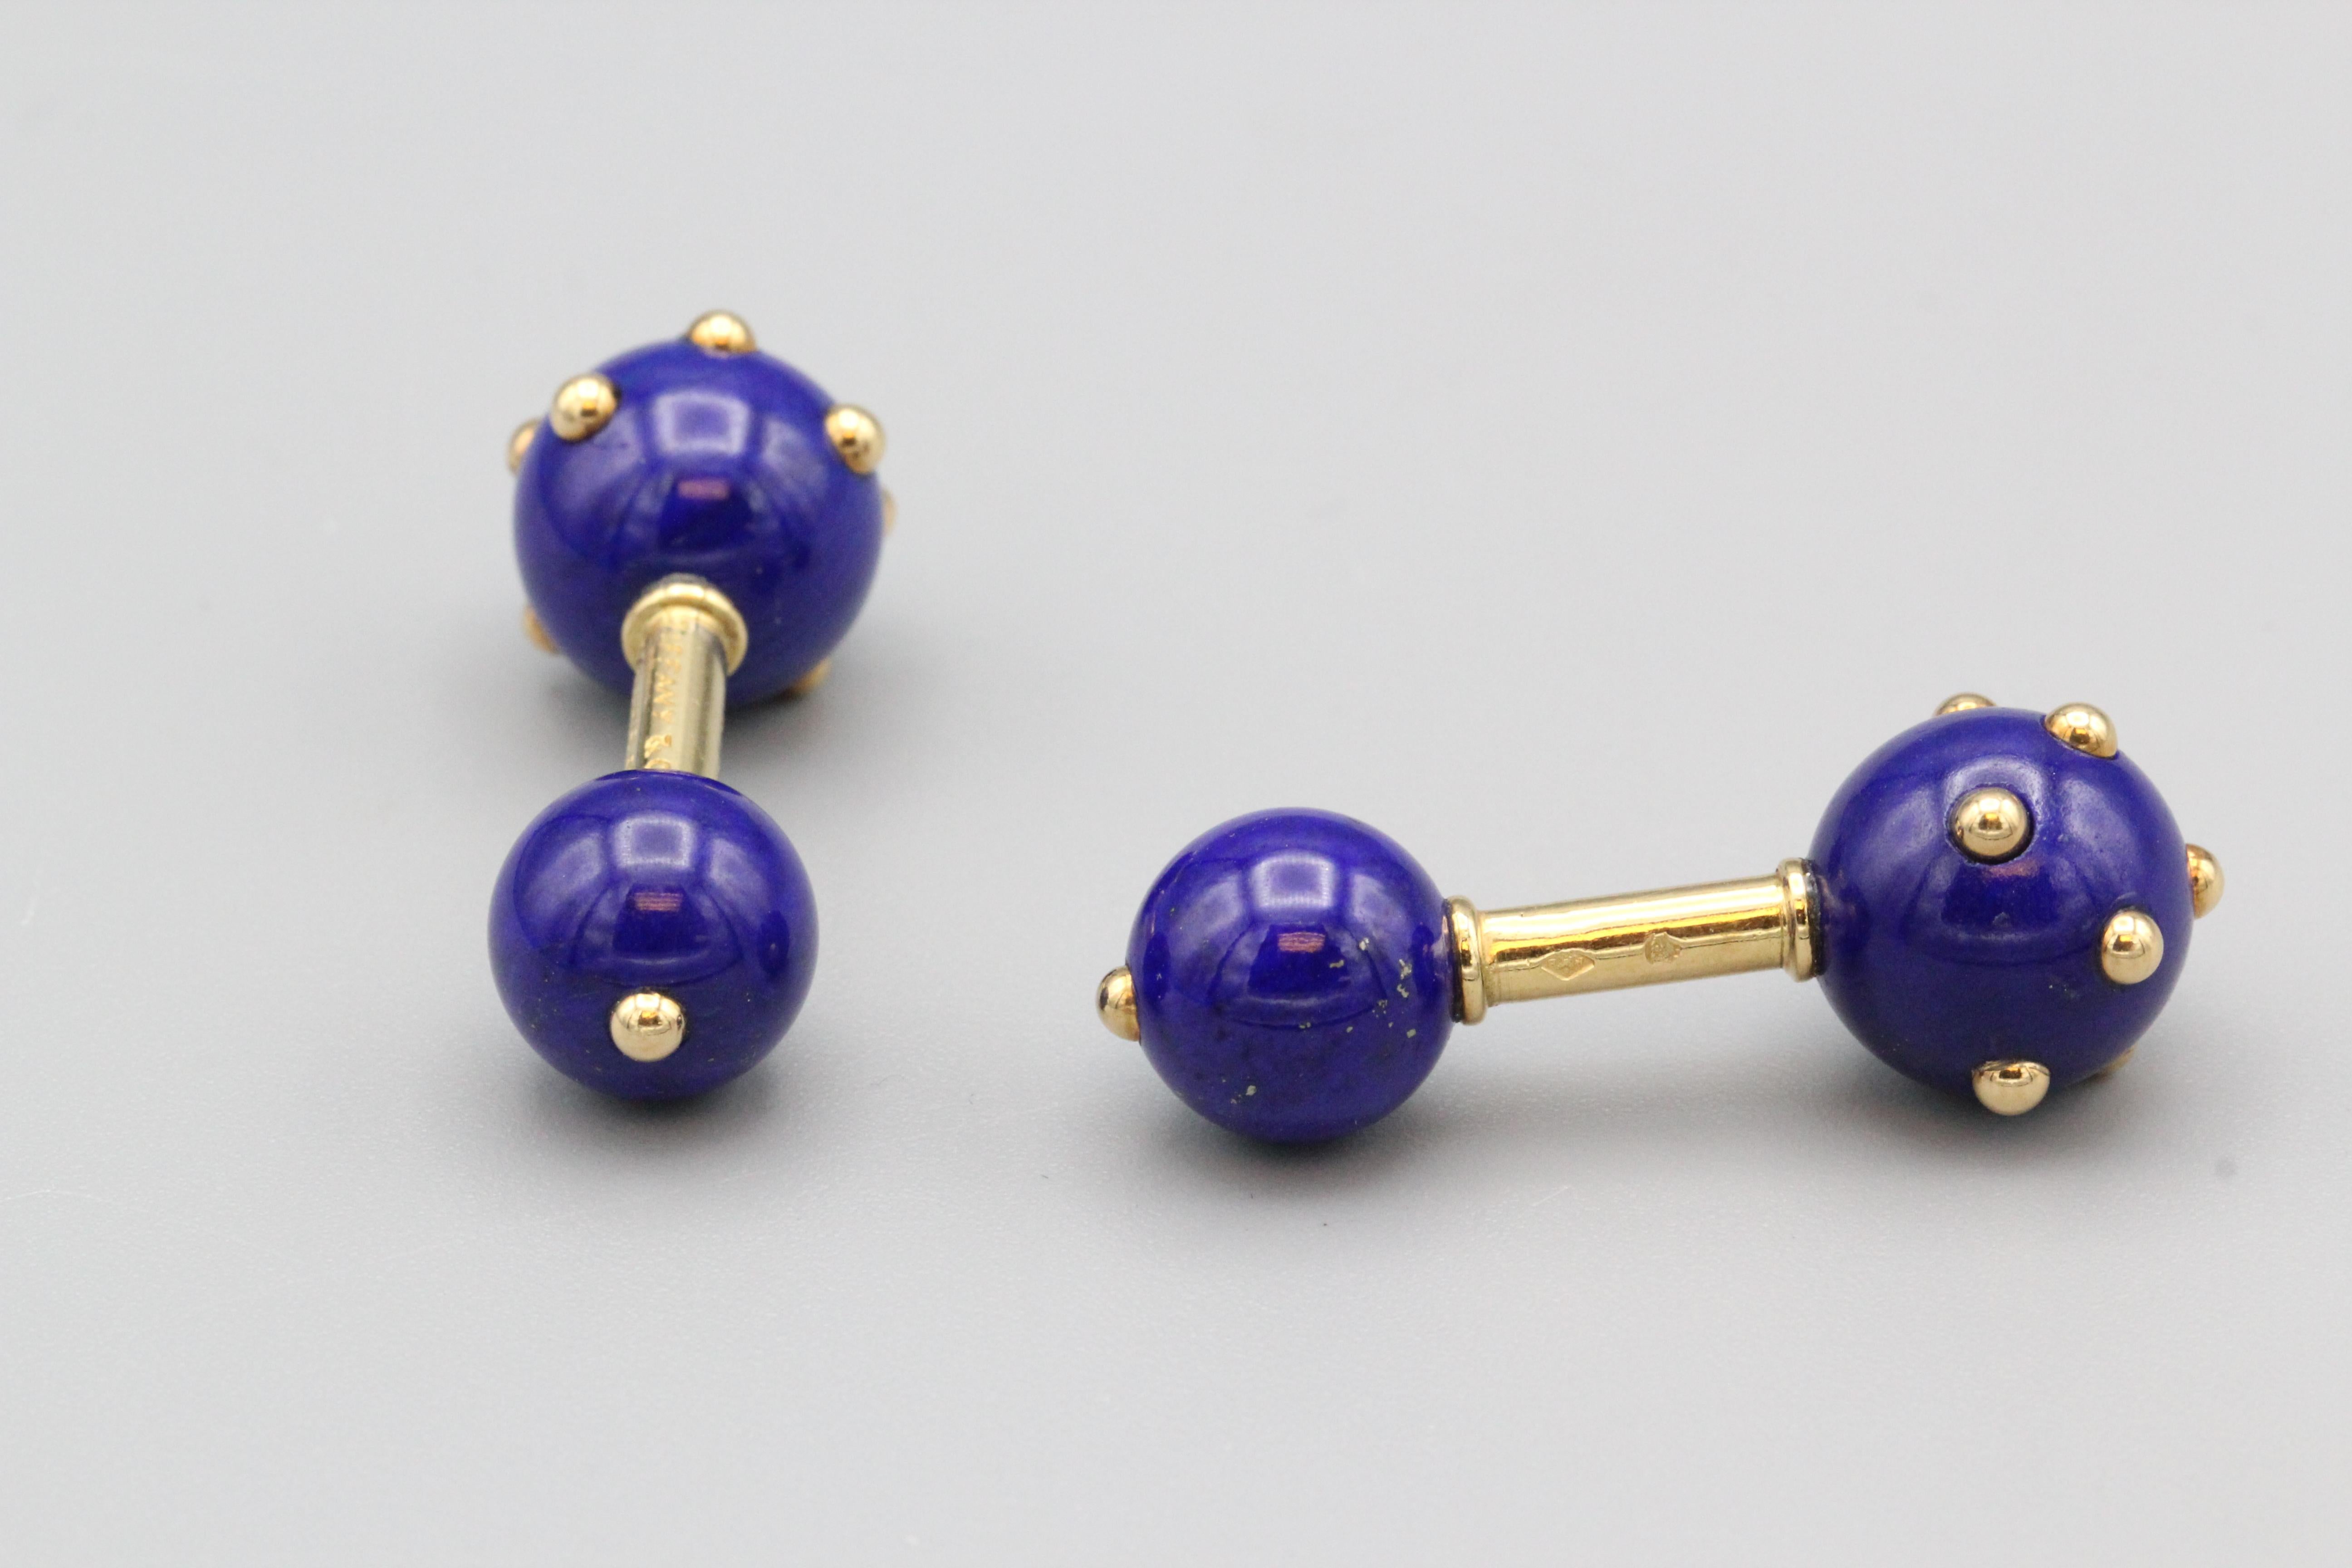 Fine pair of 18K yellow gold and lapis lazuli cufflinks by Tiffany & Co. Schlumberger.  These cufflinks are made of fine polished lapis spheres that are studded with 18k gold beads interspersed on each end.  

Hallmarks: Tiffany & Co. Schlumberger